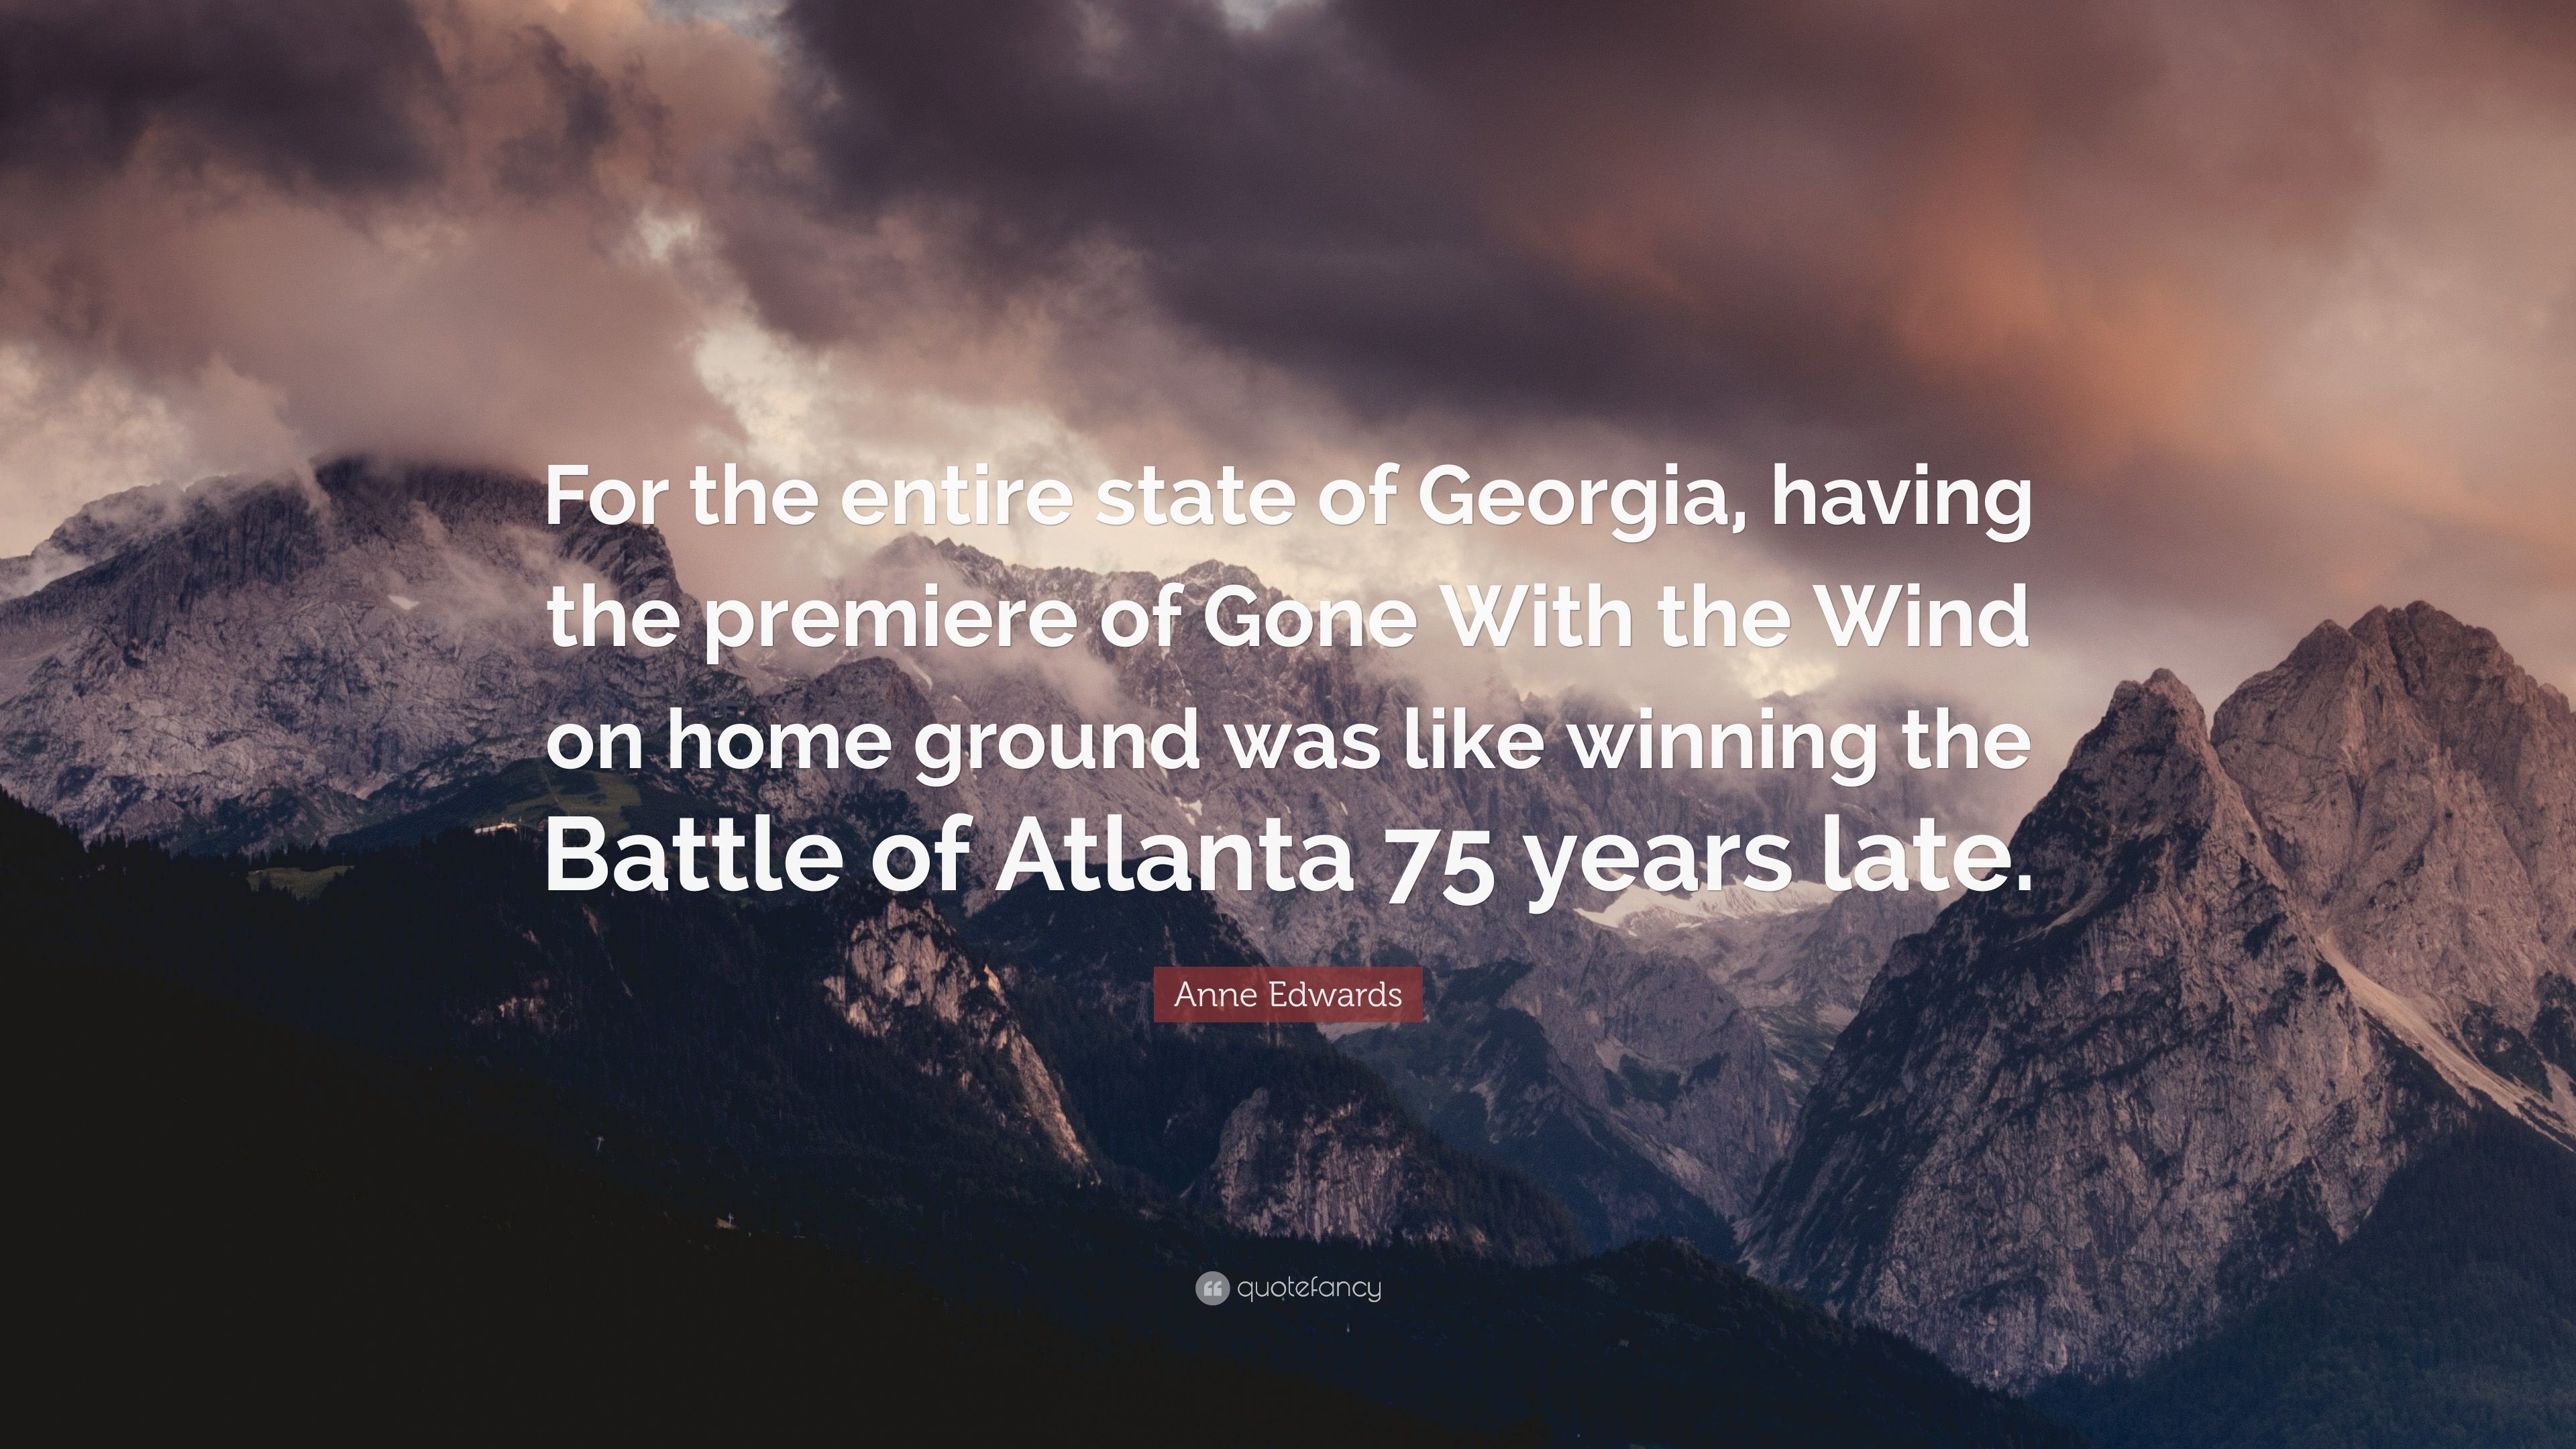 3840x2160 Anne Edwards Quote: “For the entire state of Georgia, having the premiere of